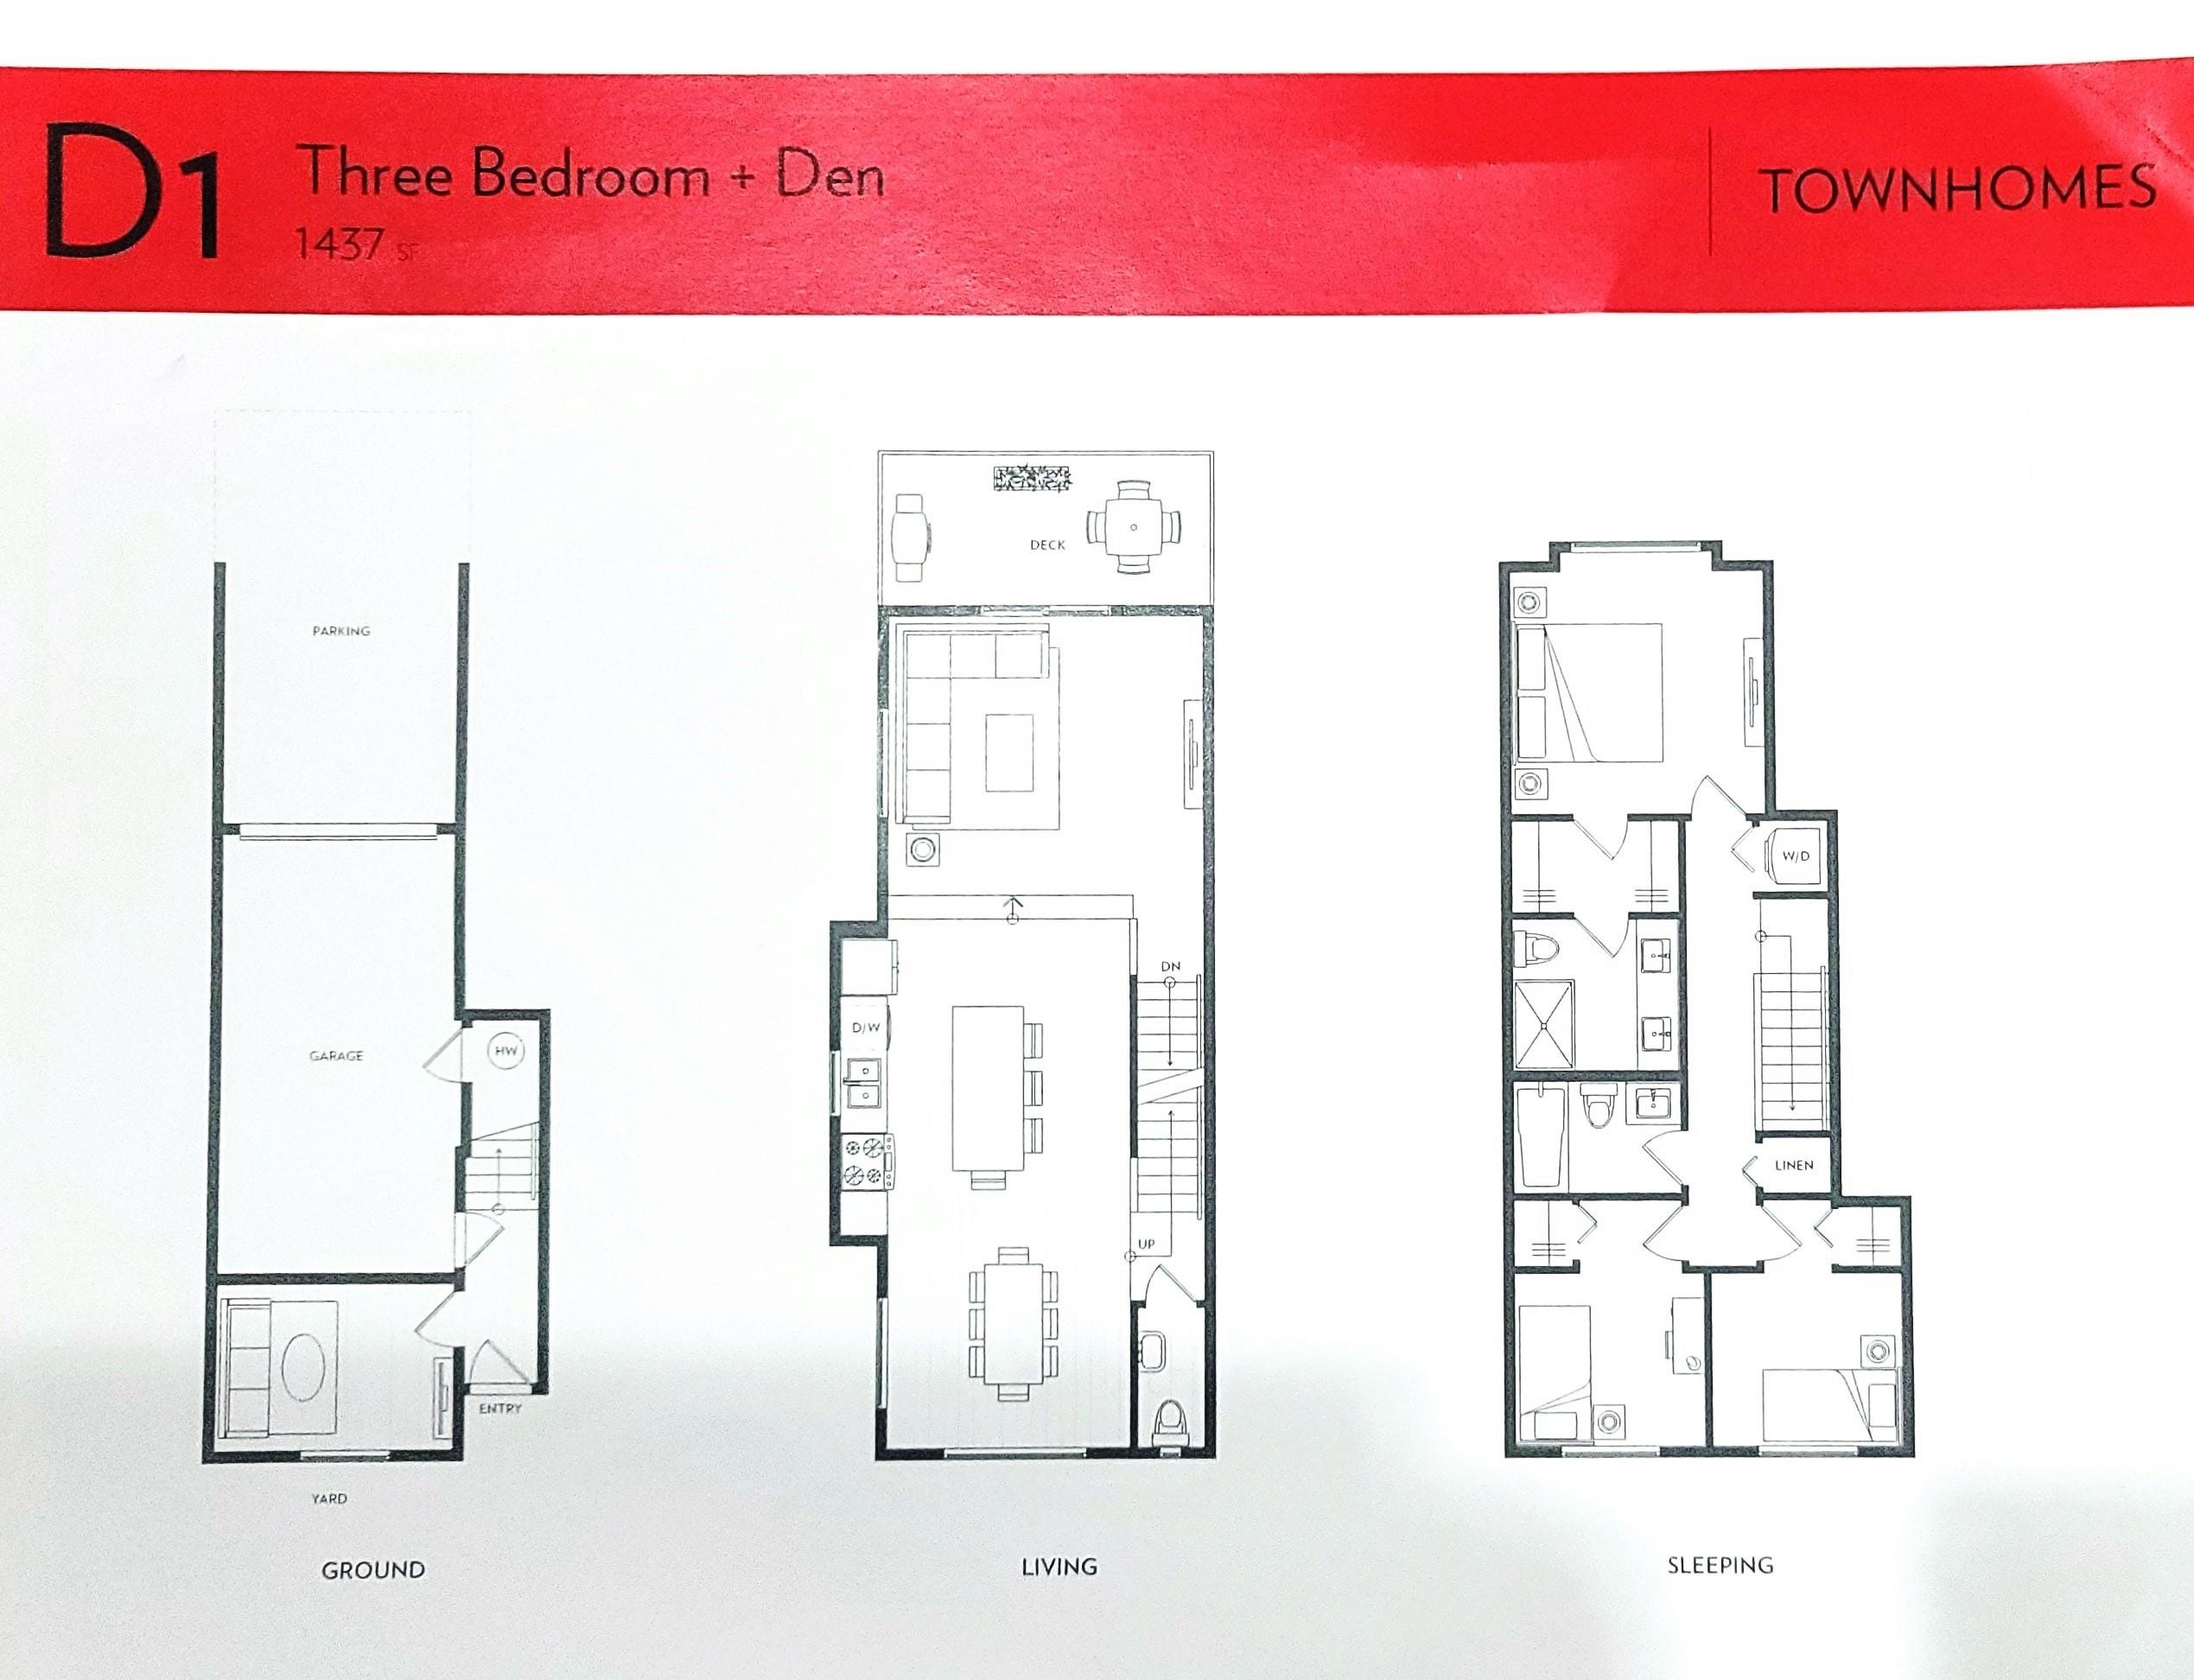 122 Floor Plan of Fleetwood Village 2 Towns with undefined beds